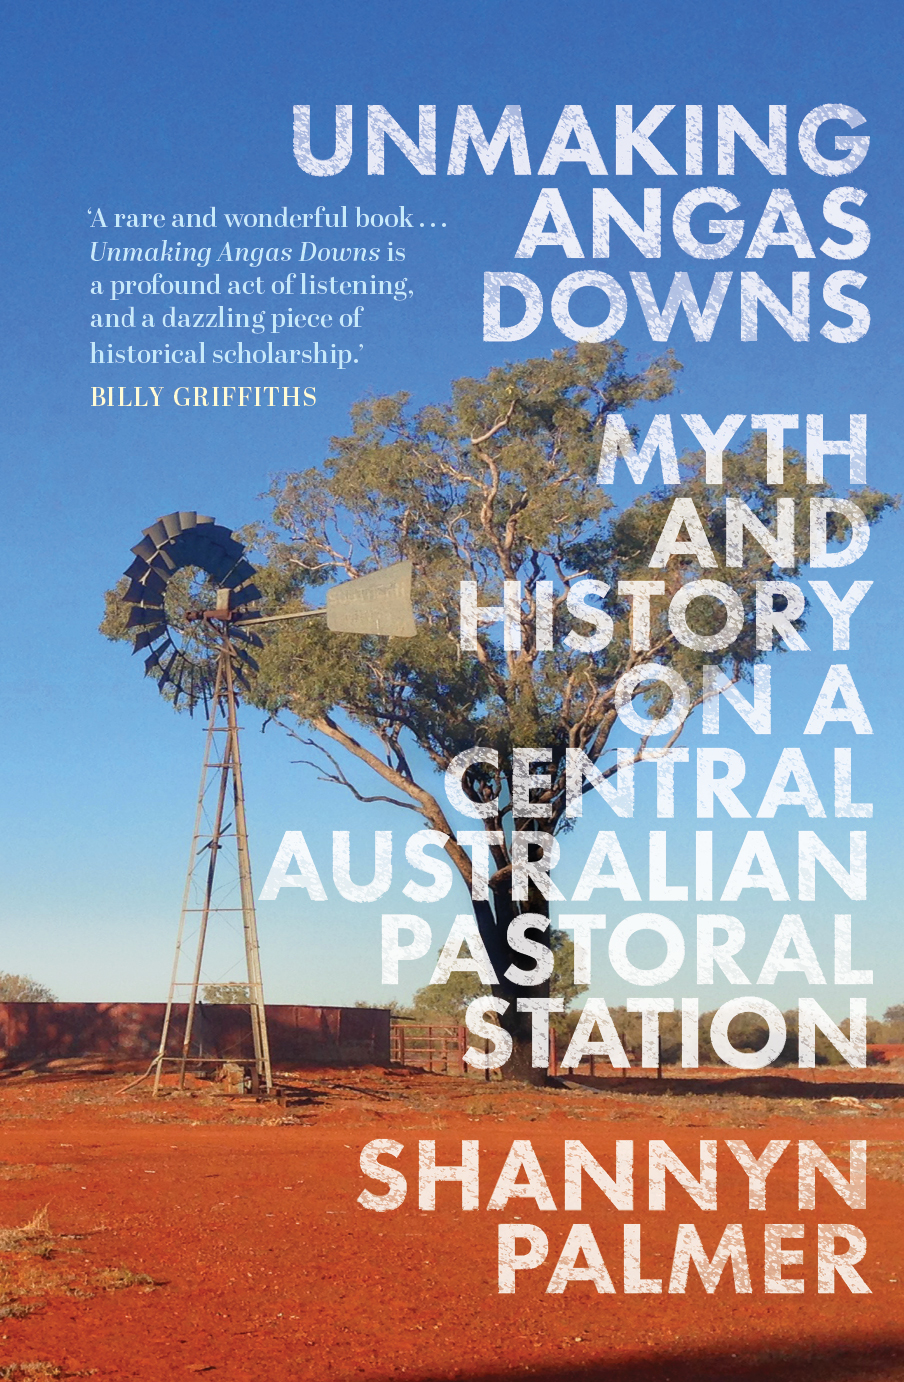 Unmaking Angas Downs: History and myth on a Central Australian pastoral station